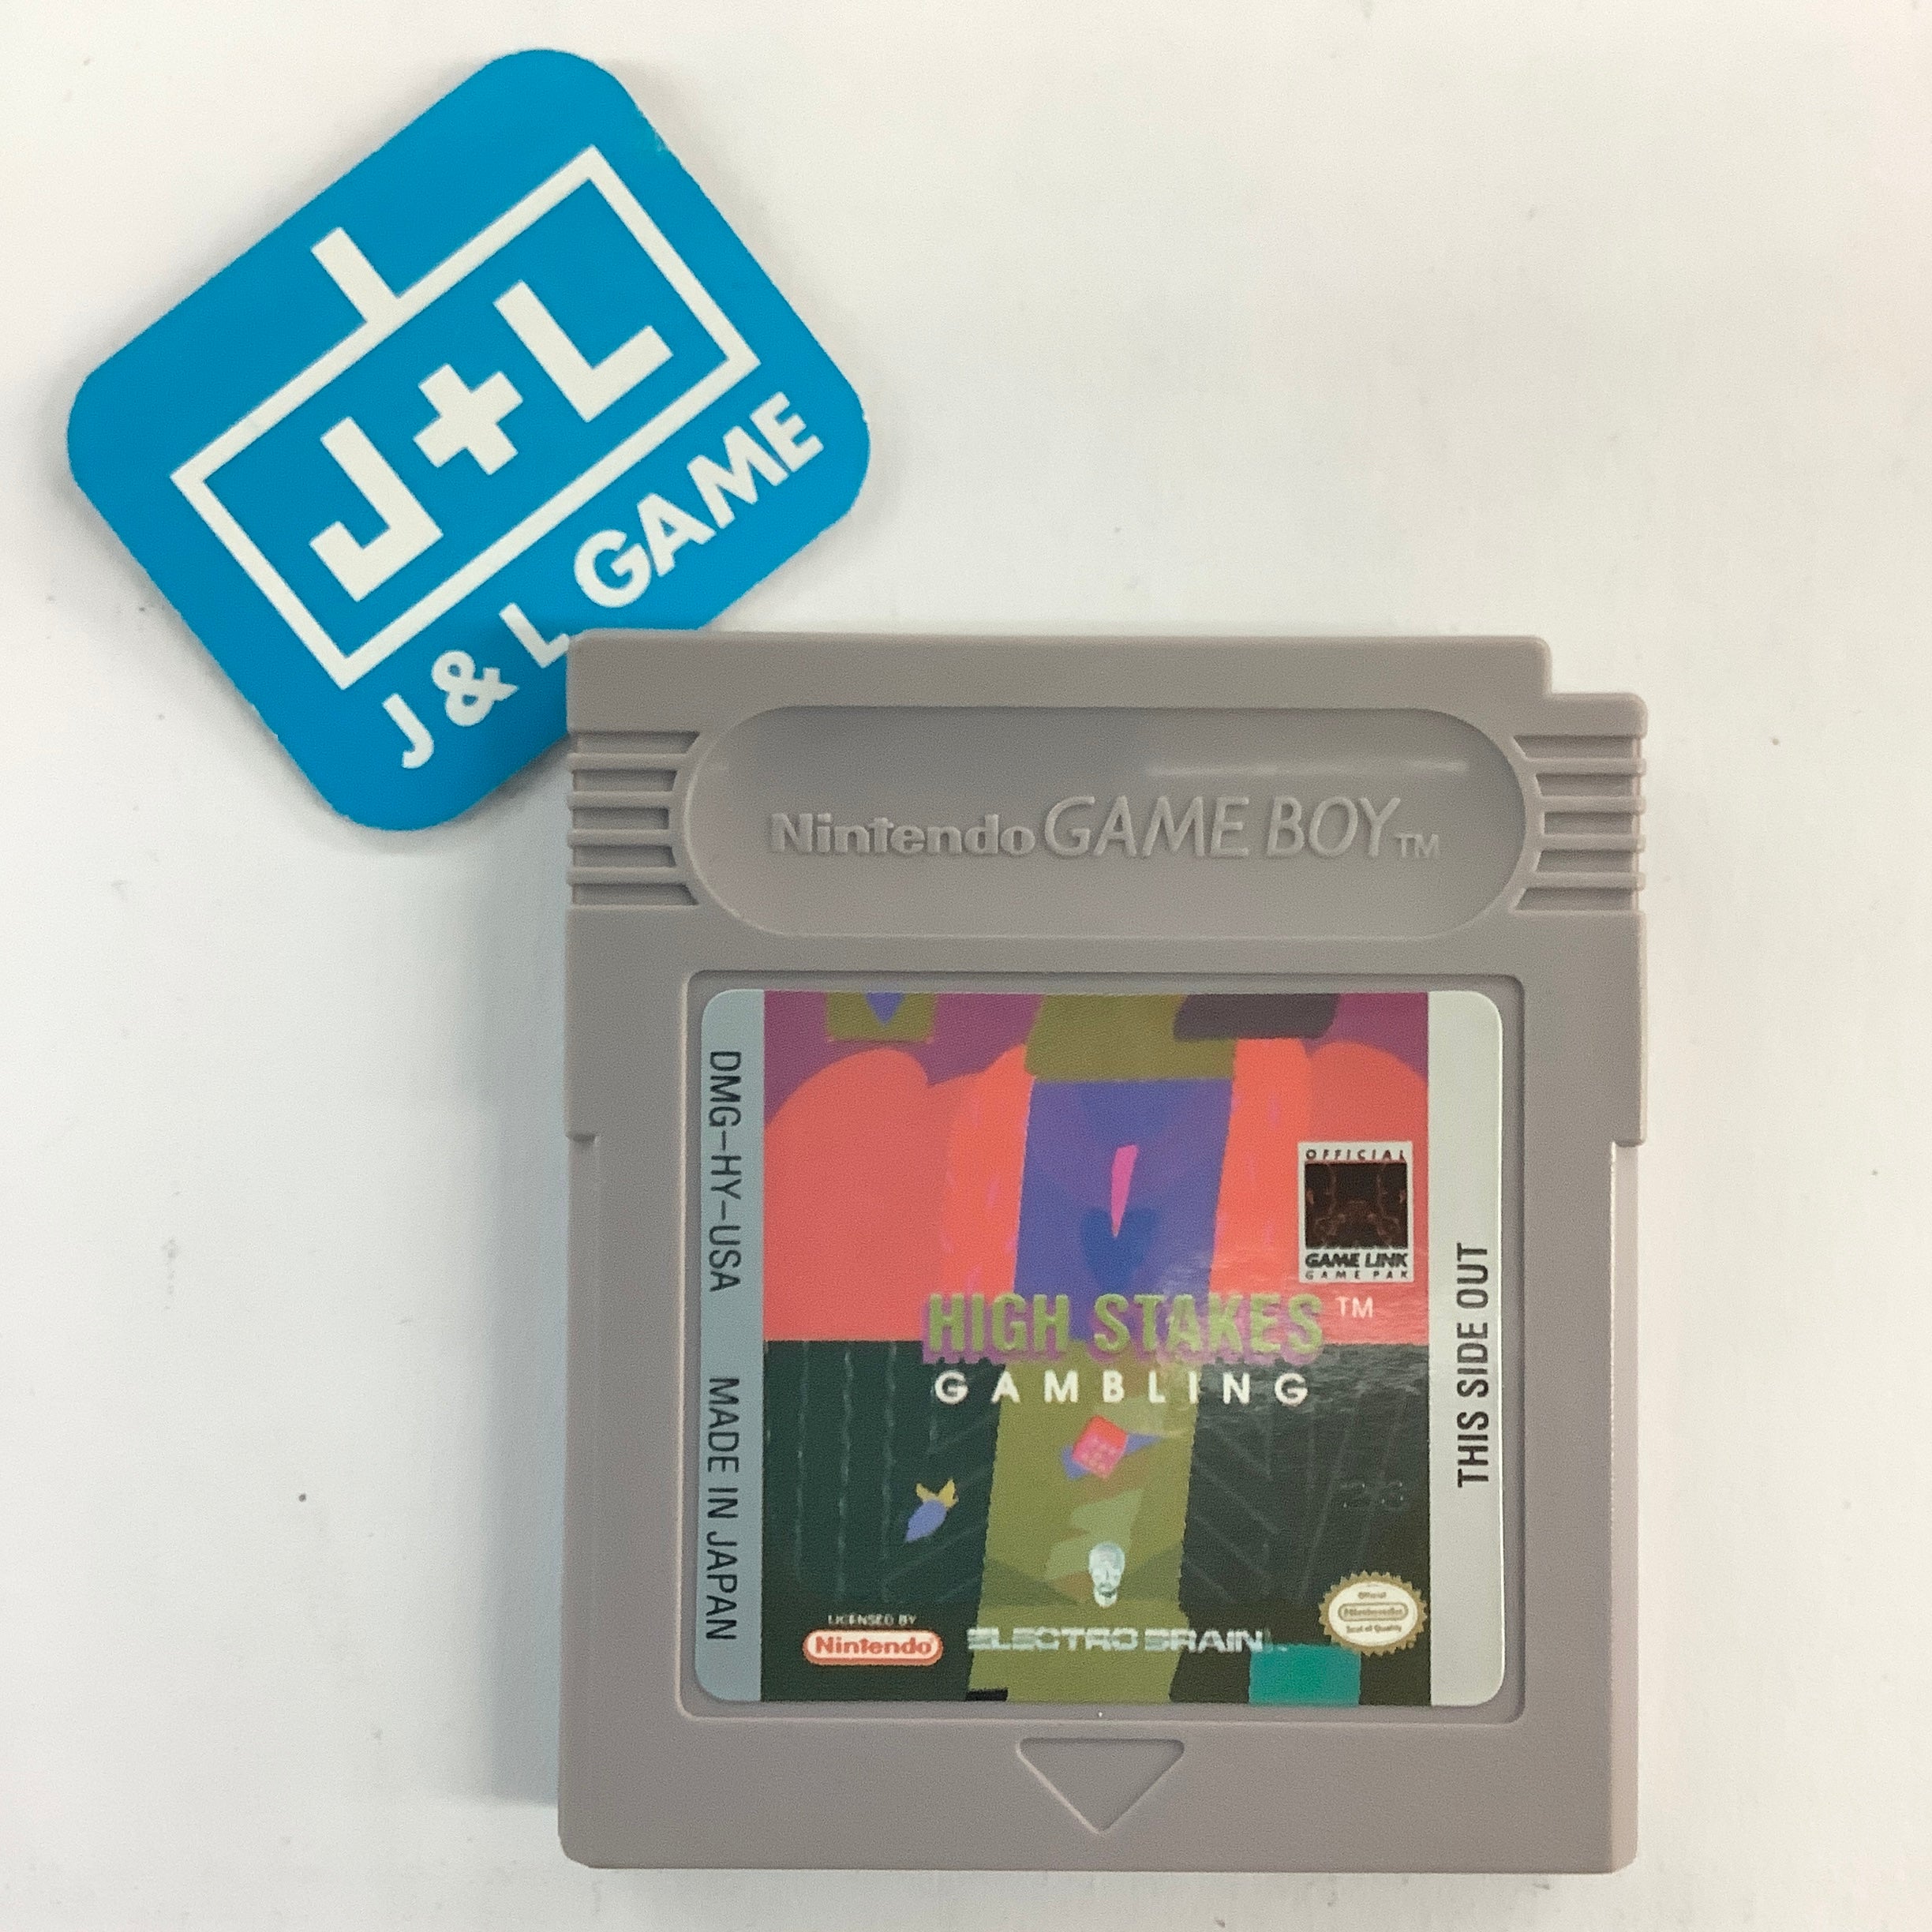 High Stakes Gambling - (GB) Game Boy [Pre-Owned] Video Games Electro Brain   